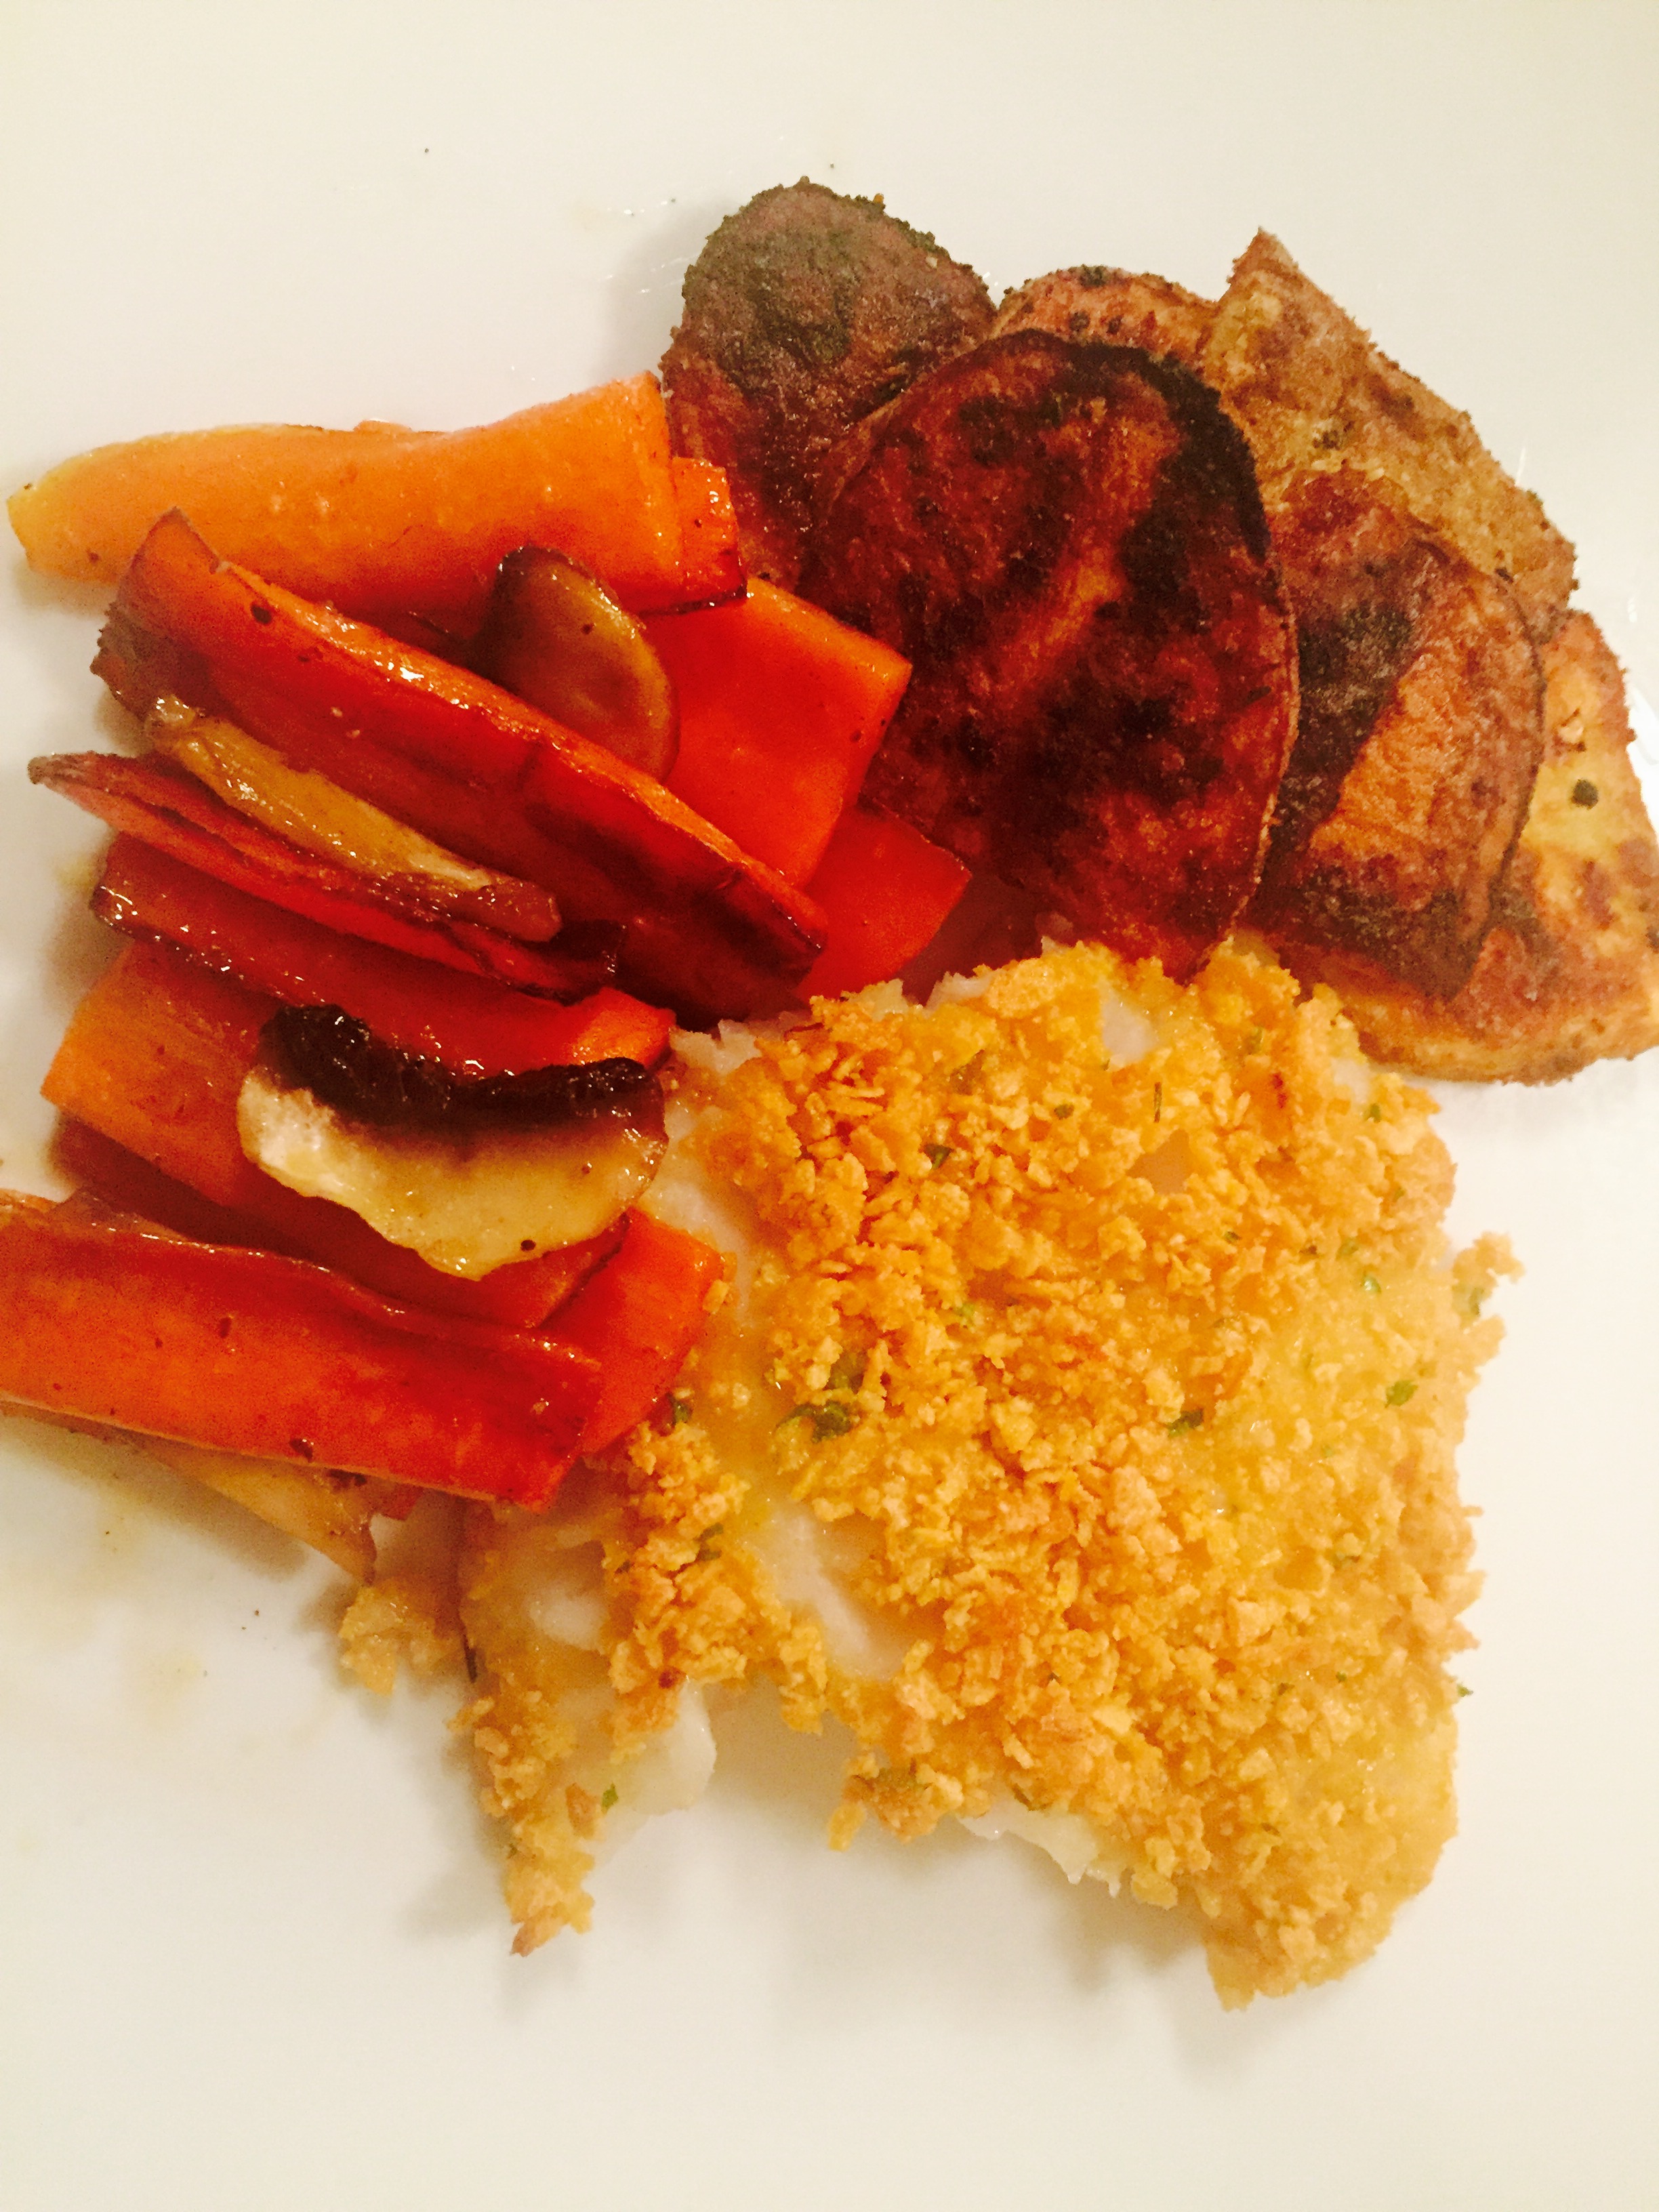 Crispy baked cod with maple glazed carrots and roasted potatoes